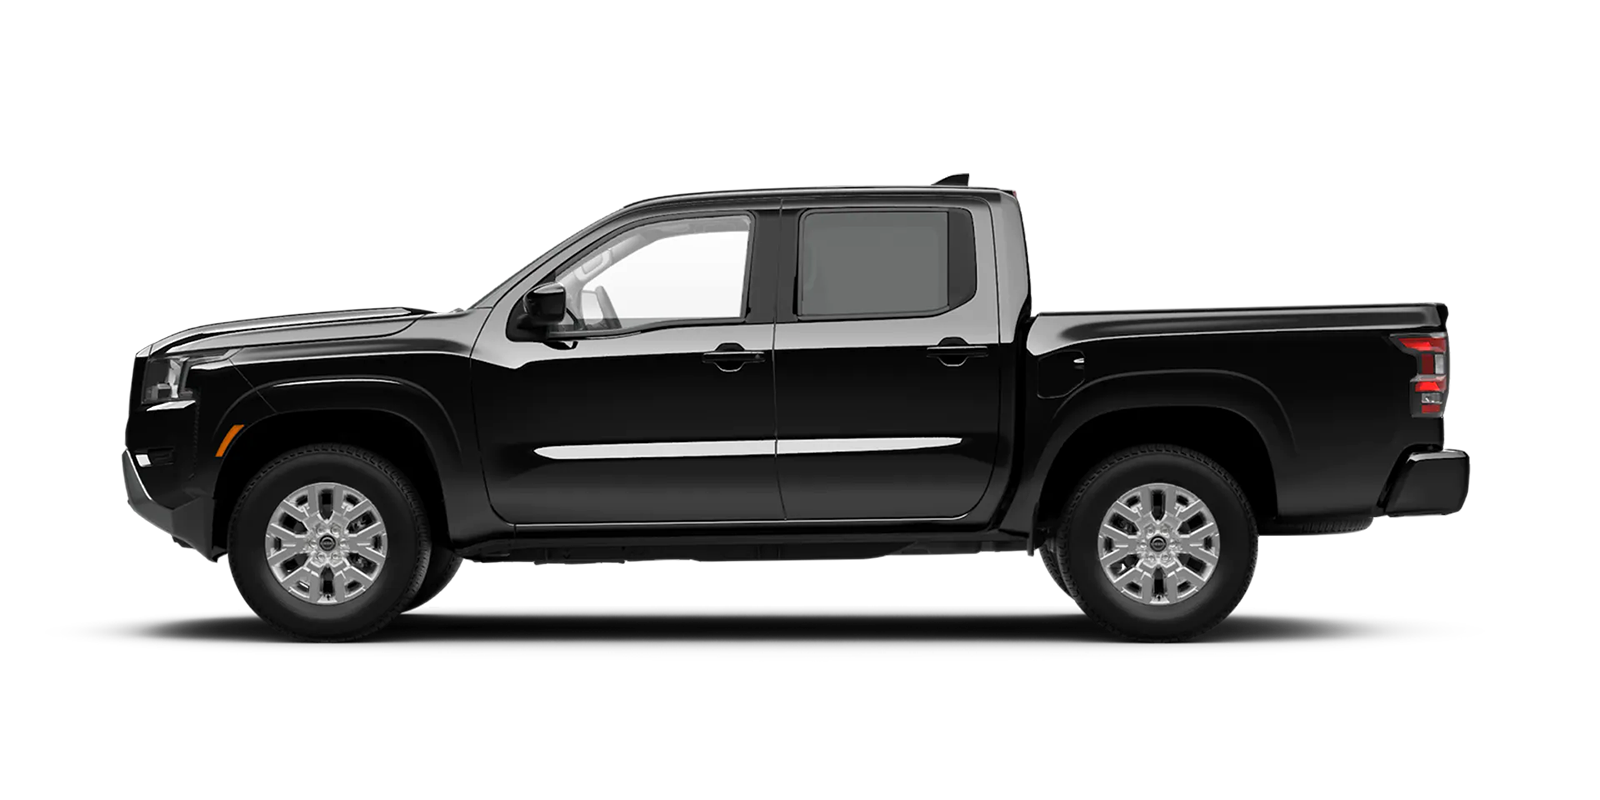 2022 Frontier Crew Cab SV 4x2 in Super Black | Wallace Nissan of Kingsport in Kingsport TN